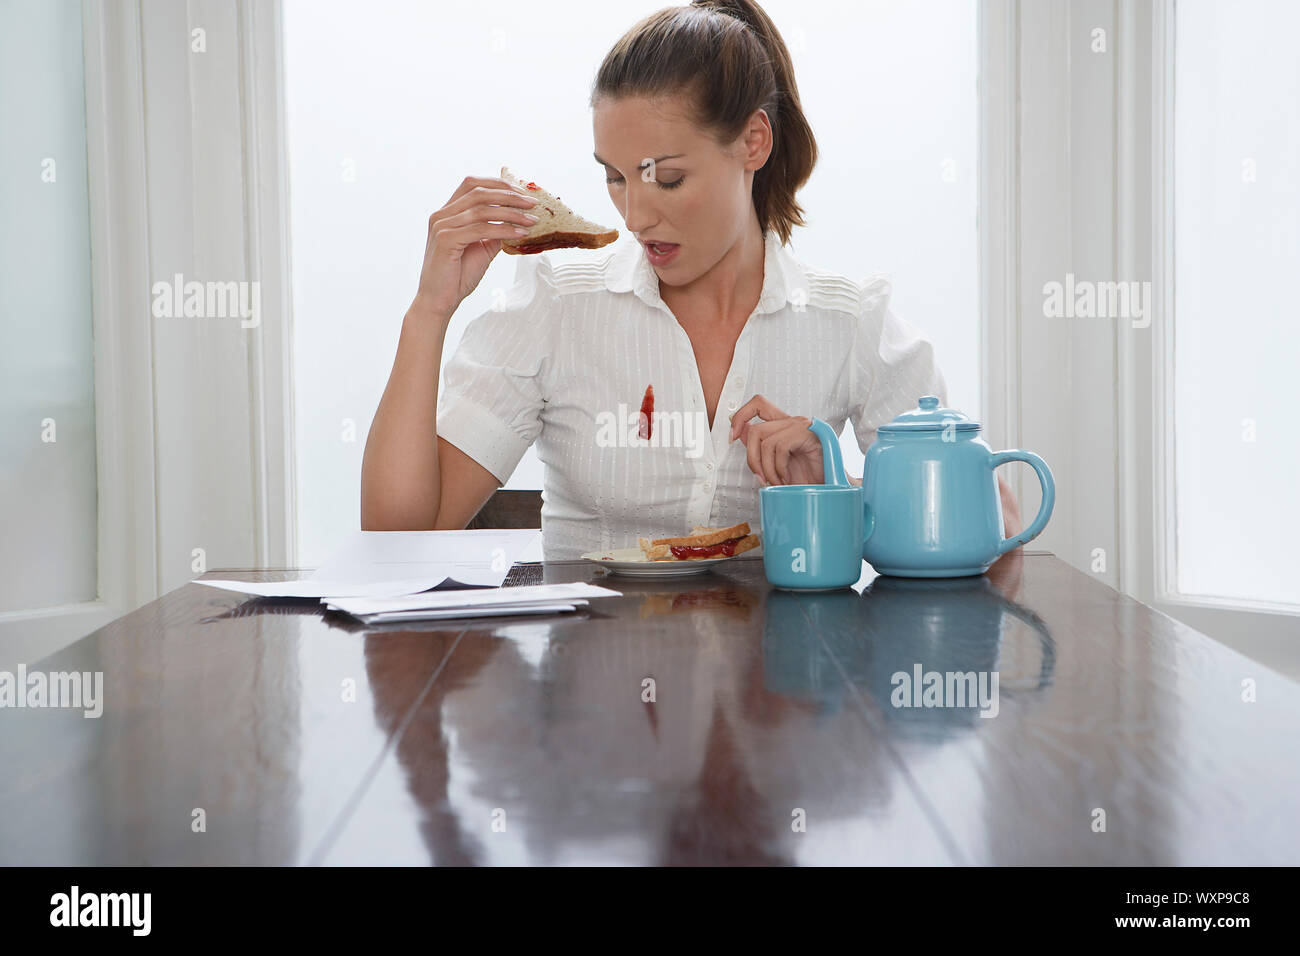 Beautiful woman looking at stain on shirt while having breakfast Stock Photo